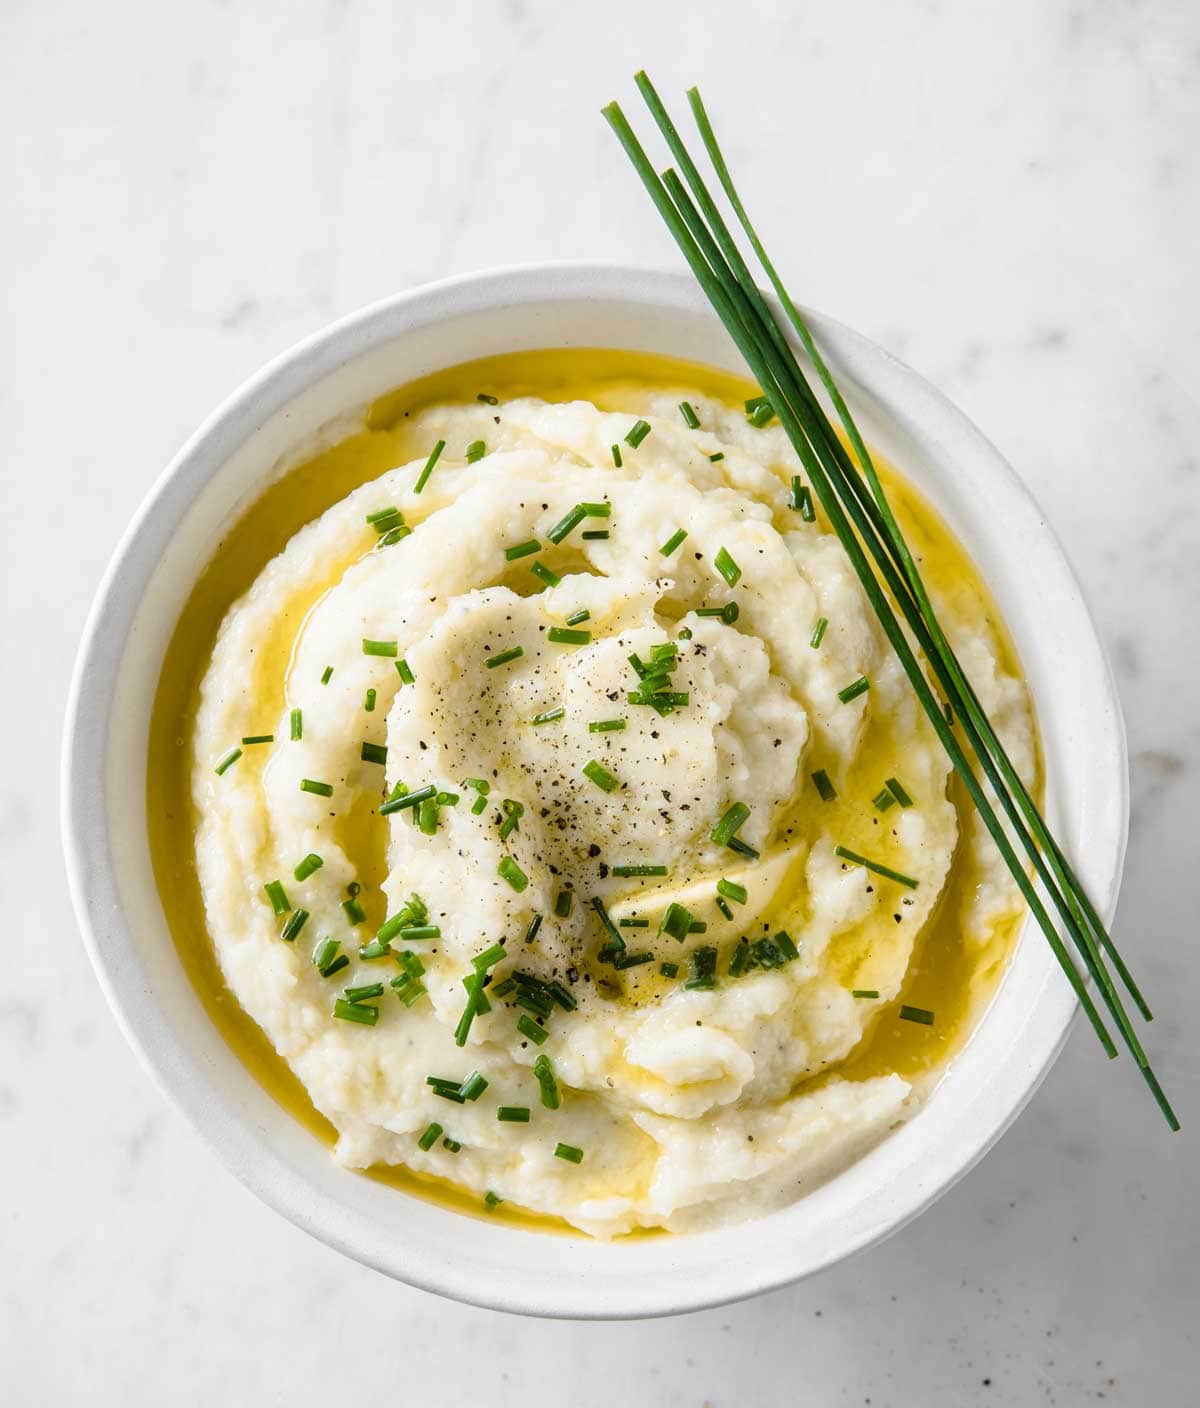 A bowl with mashed cauliflower topped with melted butter and chives.